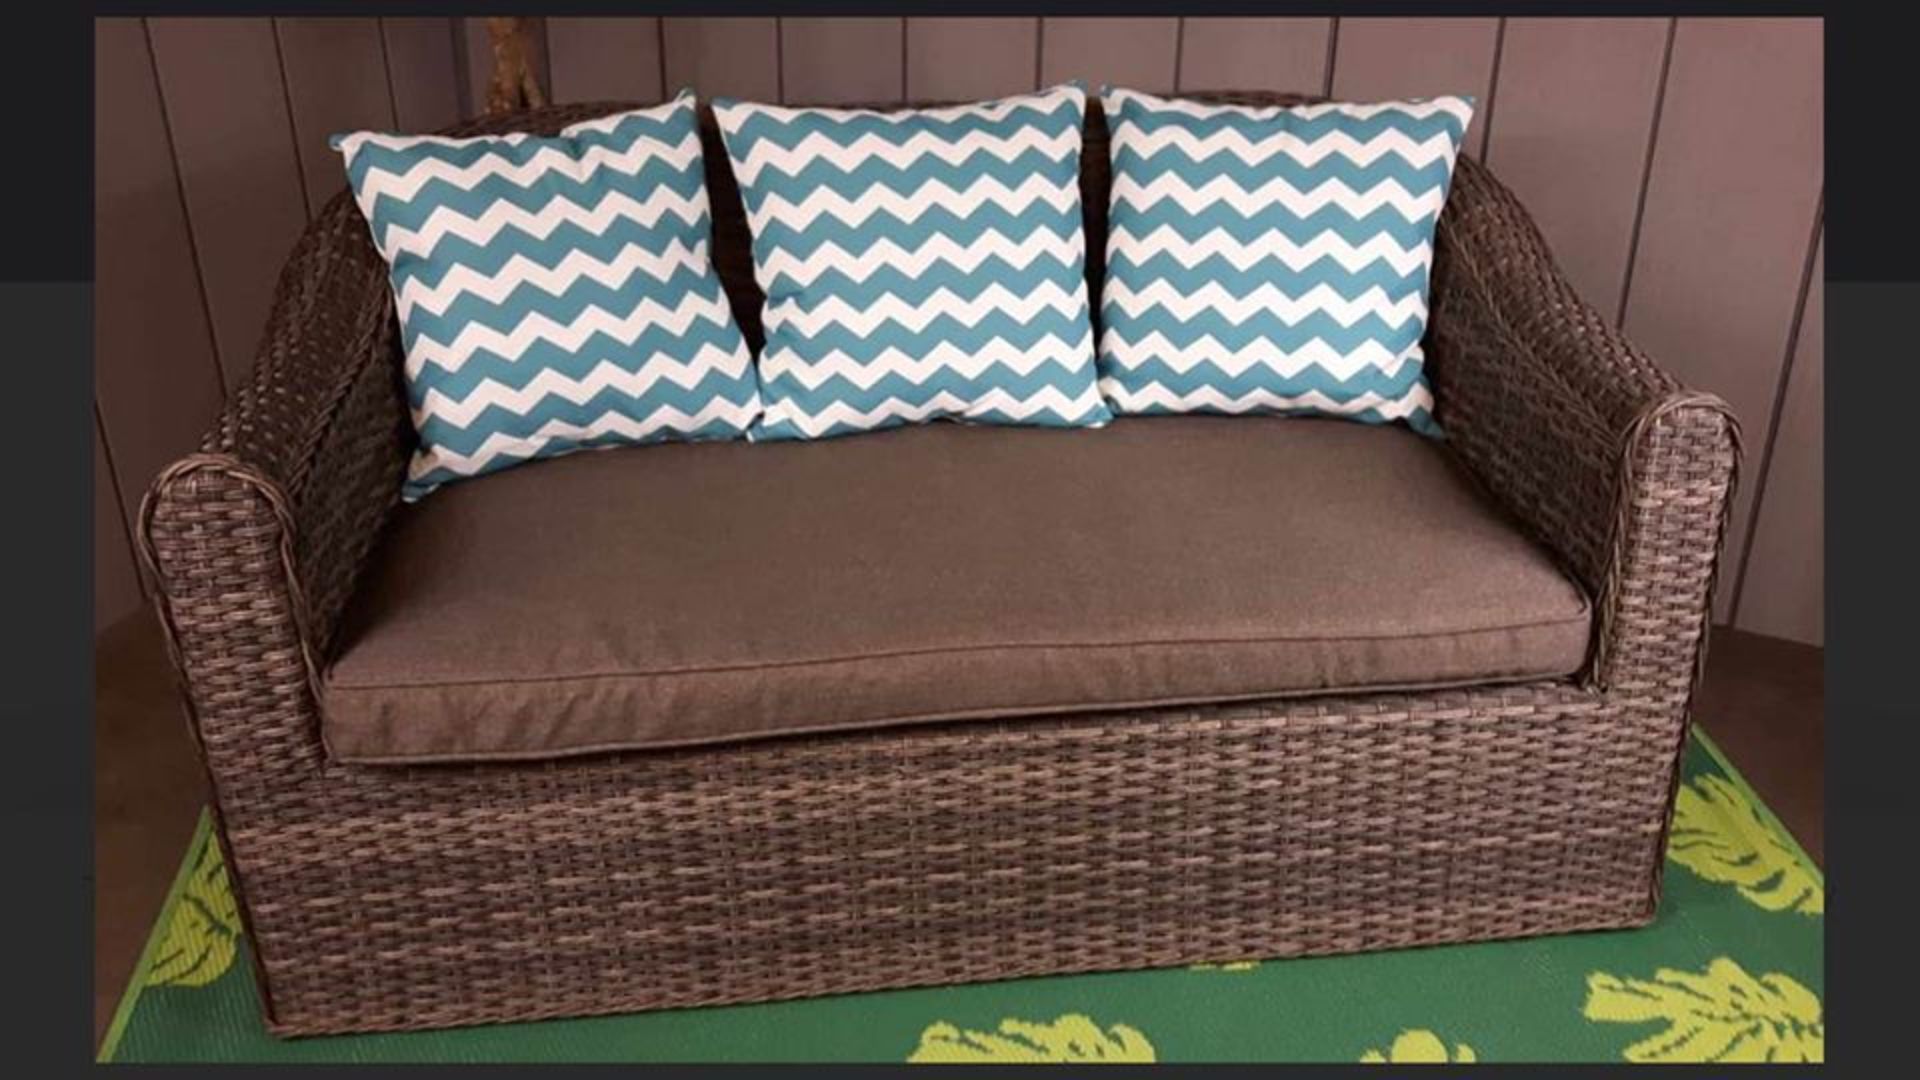 * 4 Outdoor Scatter Cushions to brighten up your Outside Furniture Colour Aqua